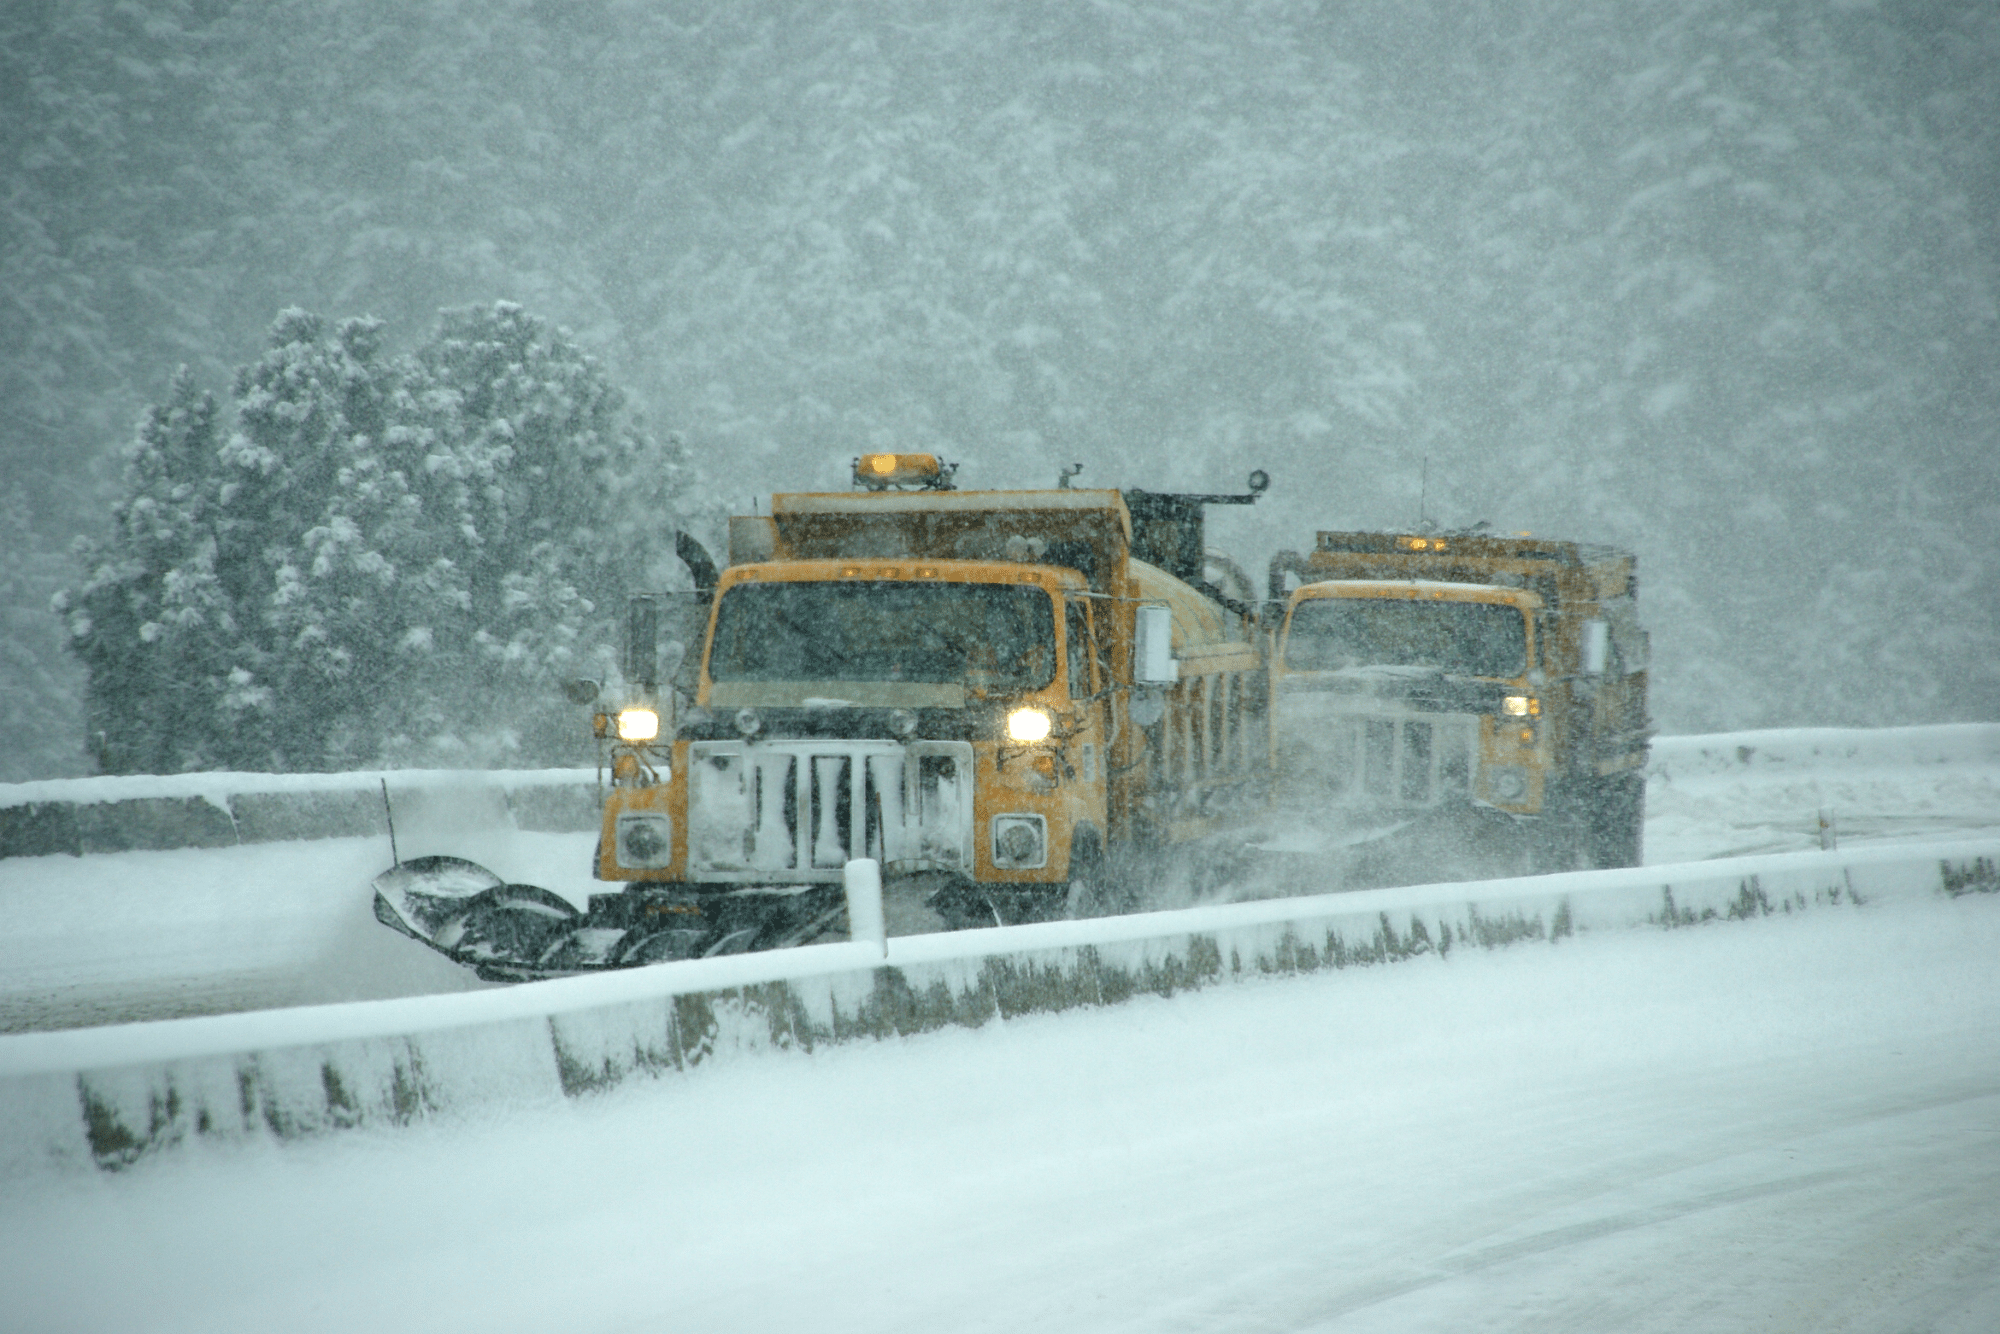 Snow plows moving snow off of highway